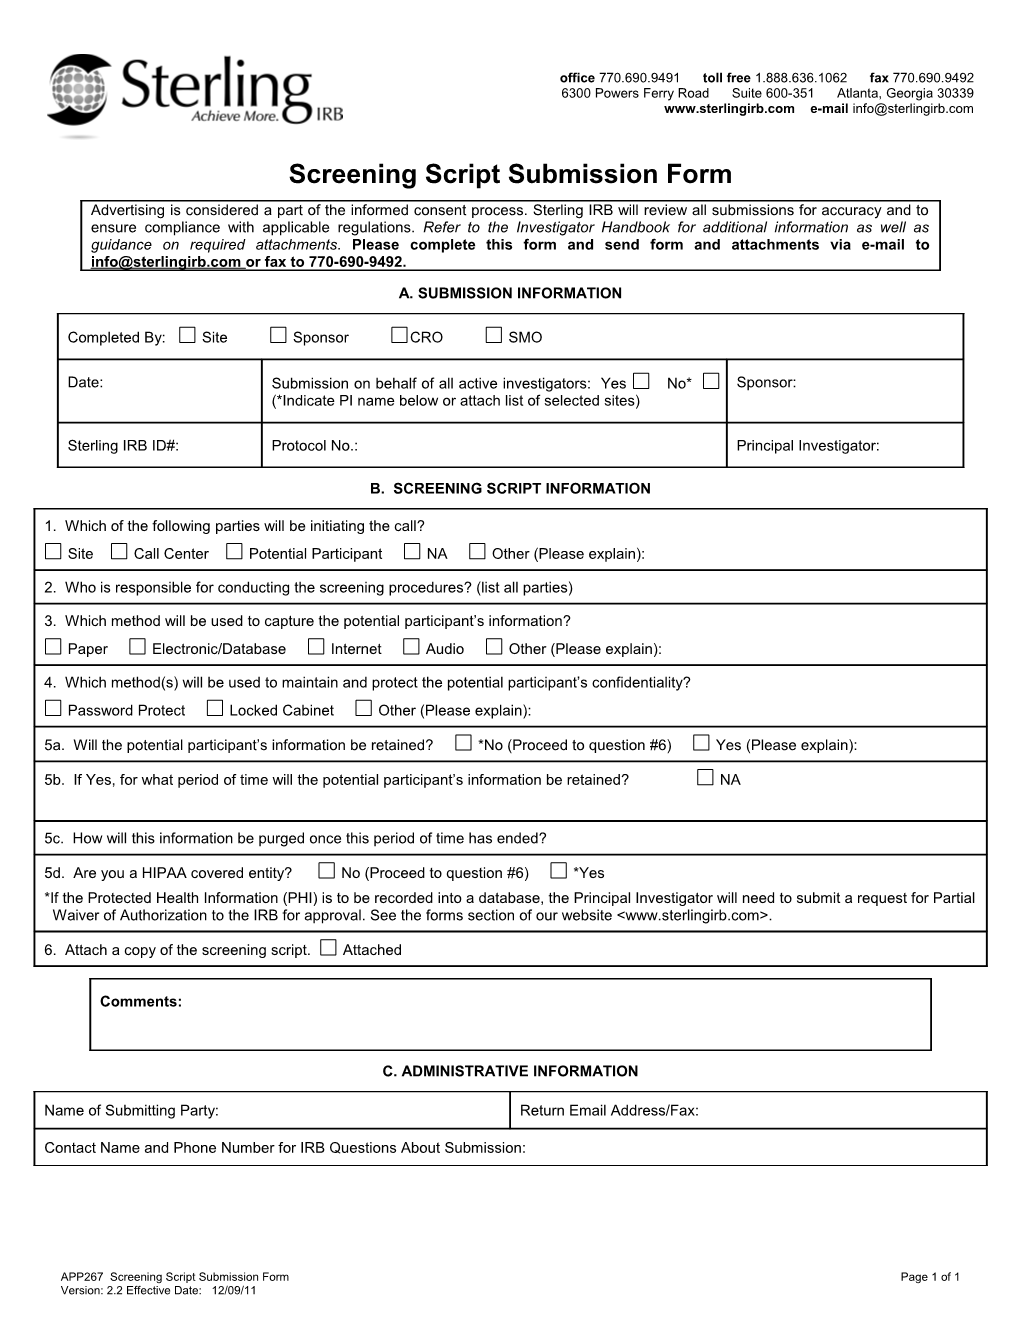 Screening Script Submission Form